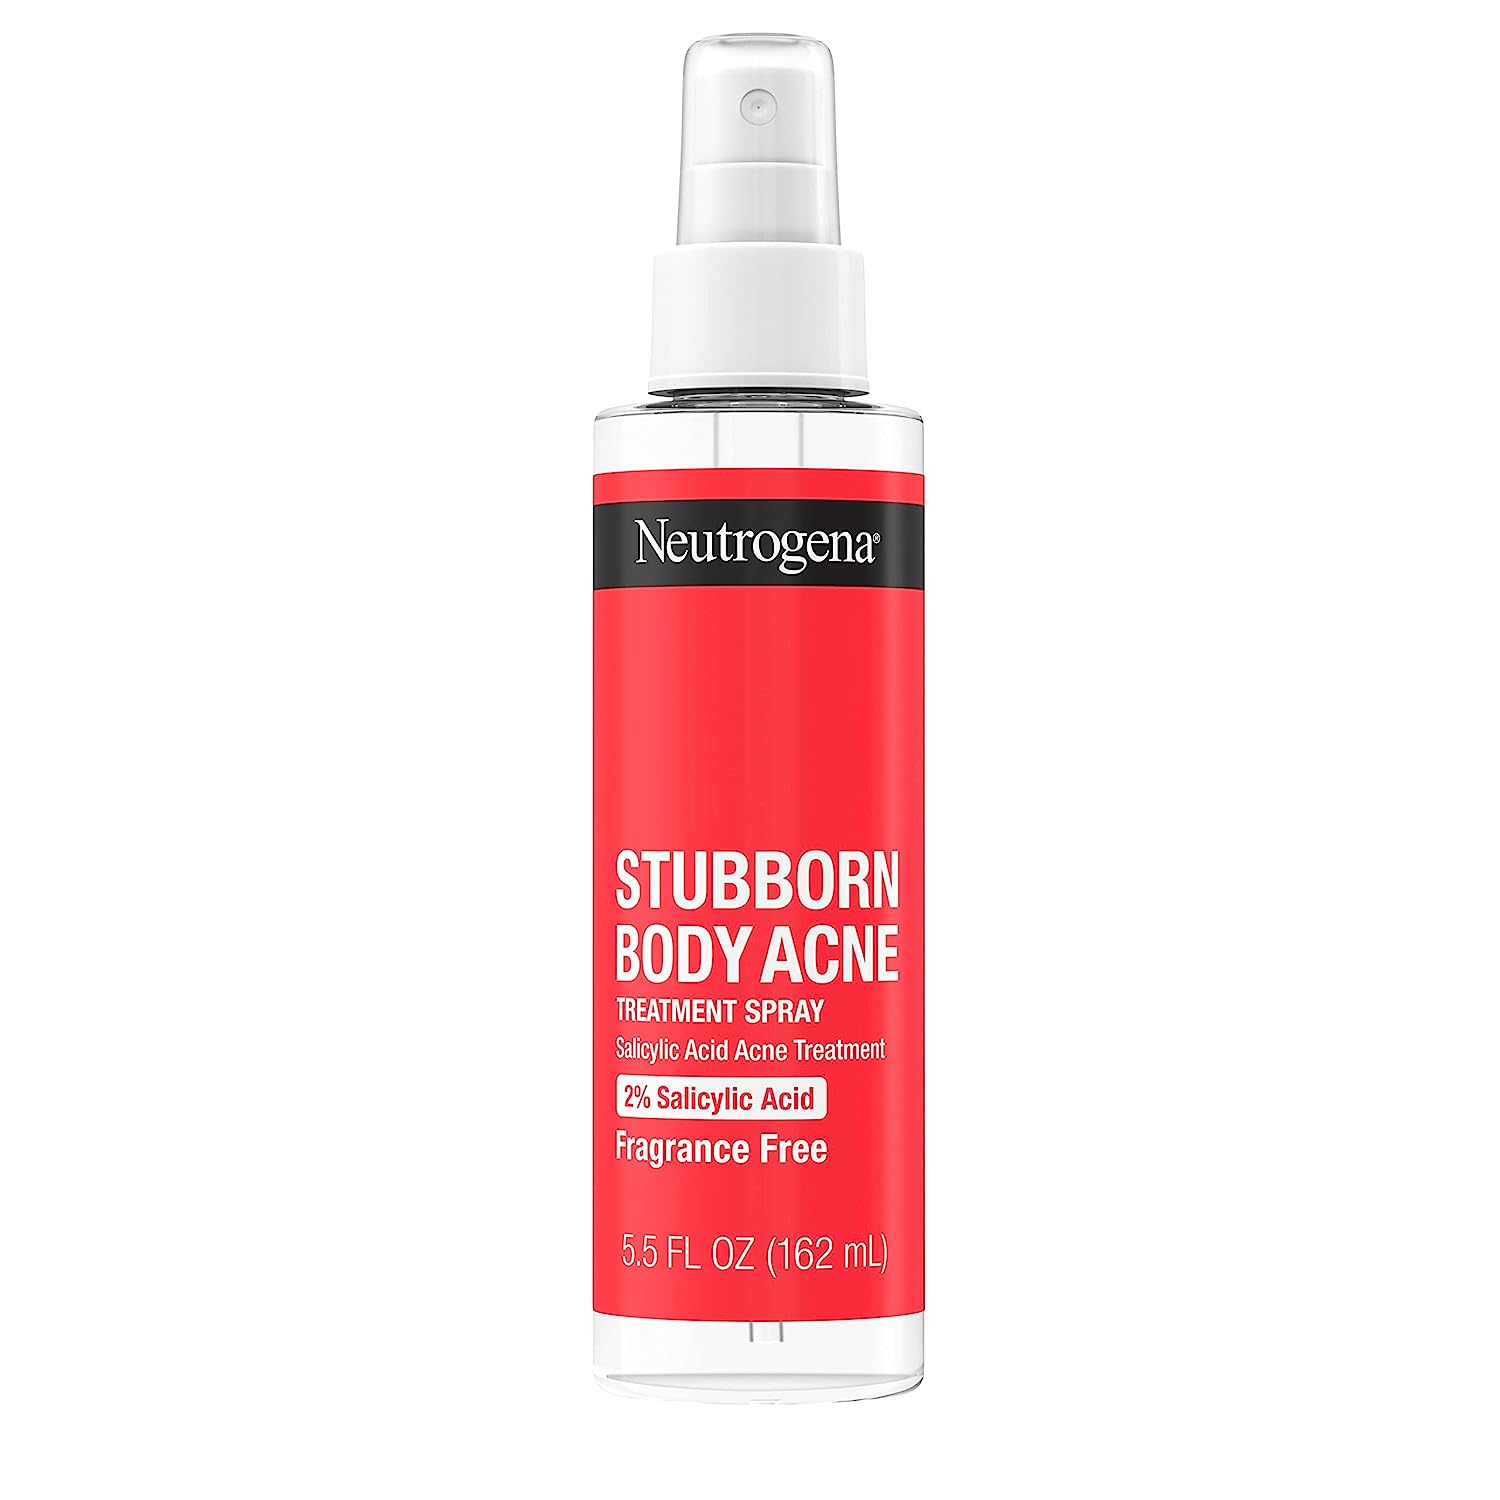 Clear and help prevent body acne. This fragrance-free [...]